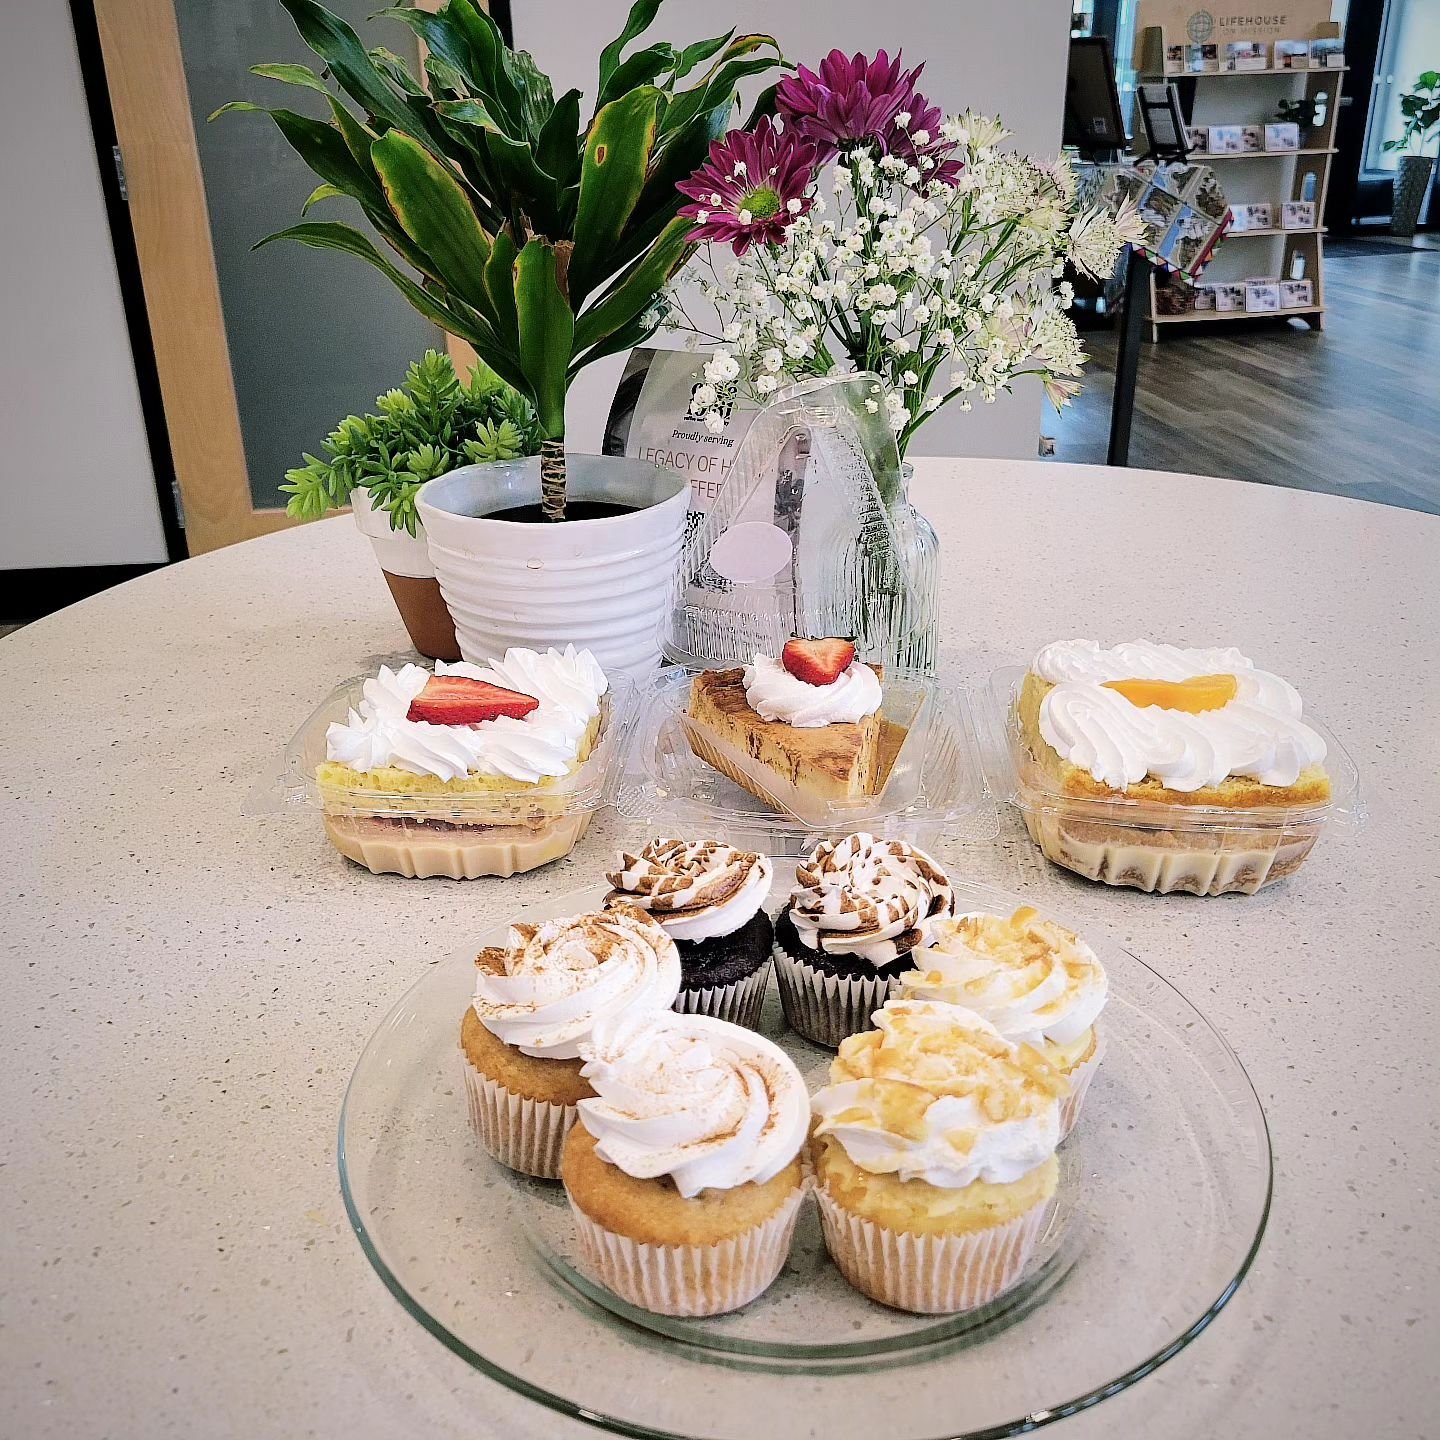 Looks what's back!!!! @uniquebitesbyaimee_ has brought more delicious treats to share with you all.  Come in and get some while supplies last! 

Cupcakes - $3.50 (Chocolate Vanilla, Banana Pudding, or Vanilla)

Flan - $5.25

Tres Leches- $6.25 (Straw